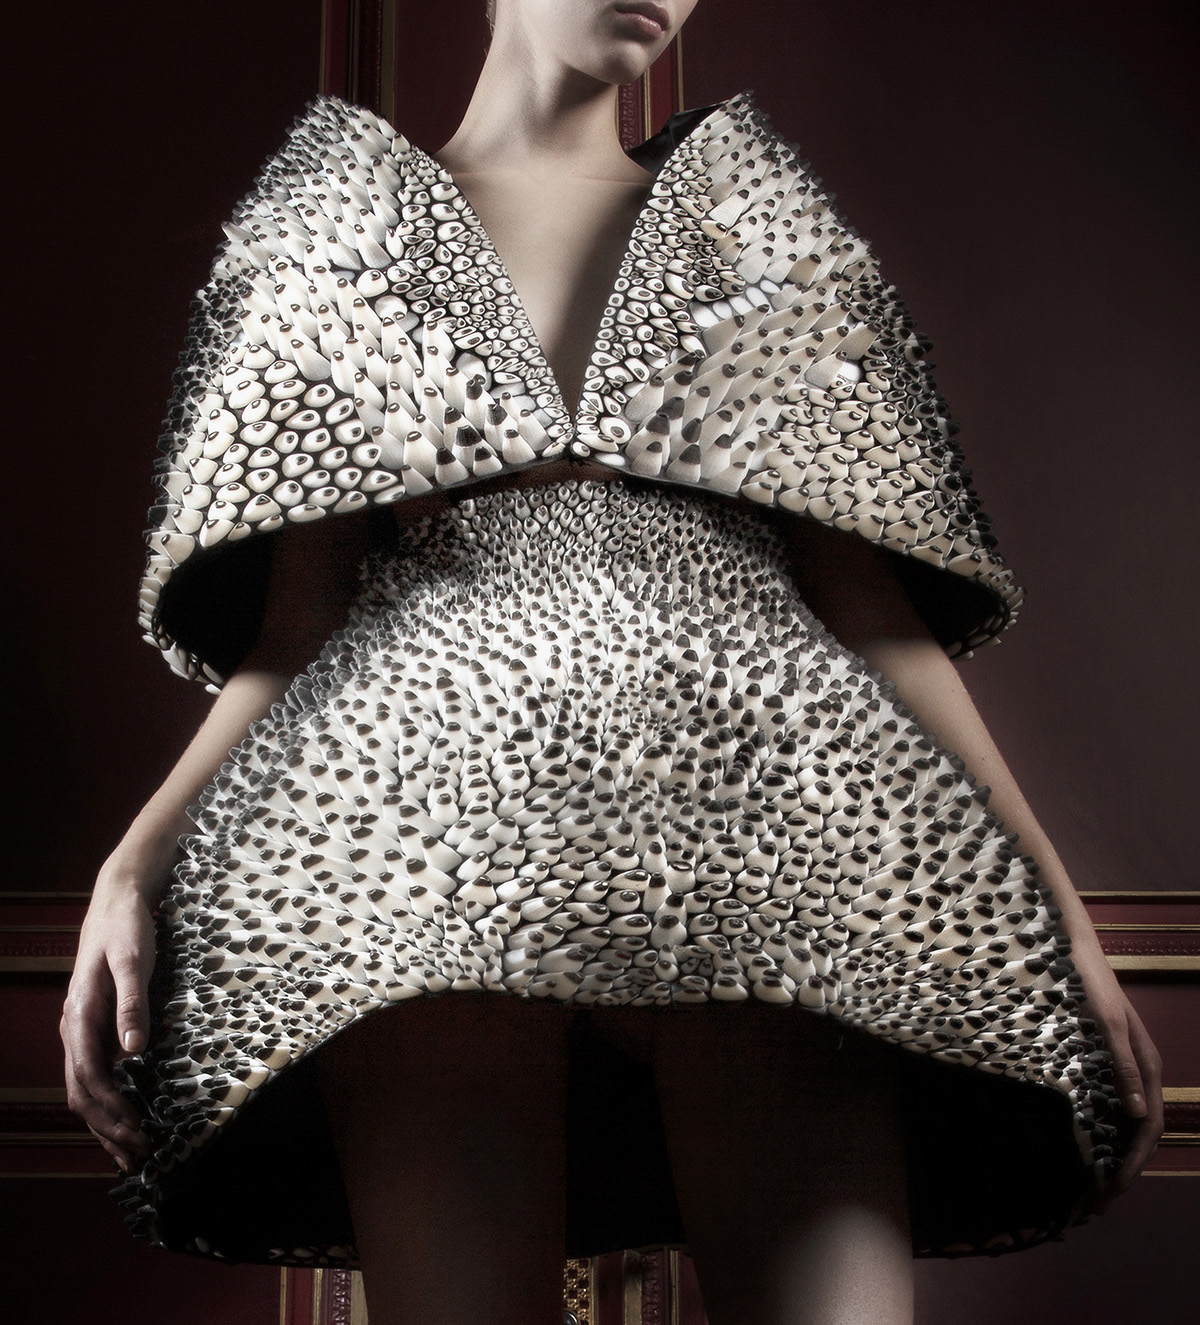 Anthazoa 3D Cape and Skirt, Voltage Collection (detail) Designed by: Iris van Herpen (Dutch, born in 1984) Designed by: Neri Oxman (Israeli, born 1976) Printed by: Stratasys Group shot: 2013.1487.1‑2 Dutch, 2013 3D‑printed polyeurethane rubber and acrylic, steel cage, and cotton twill inner lining and silk satin lining *Museum purchase with funds donated by the Fashion Council, Museum of Fine Arts Boston * M. Zoeter x Iris van Herpen © *Photography by Ronald Stoops *Courtesy, Museum of Fine Arts, Boston